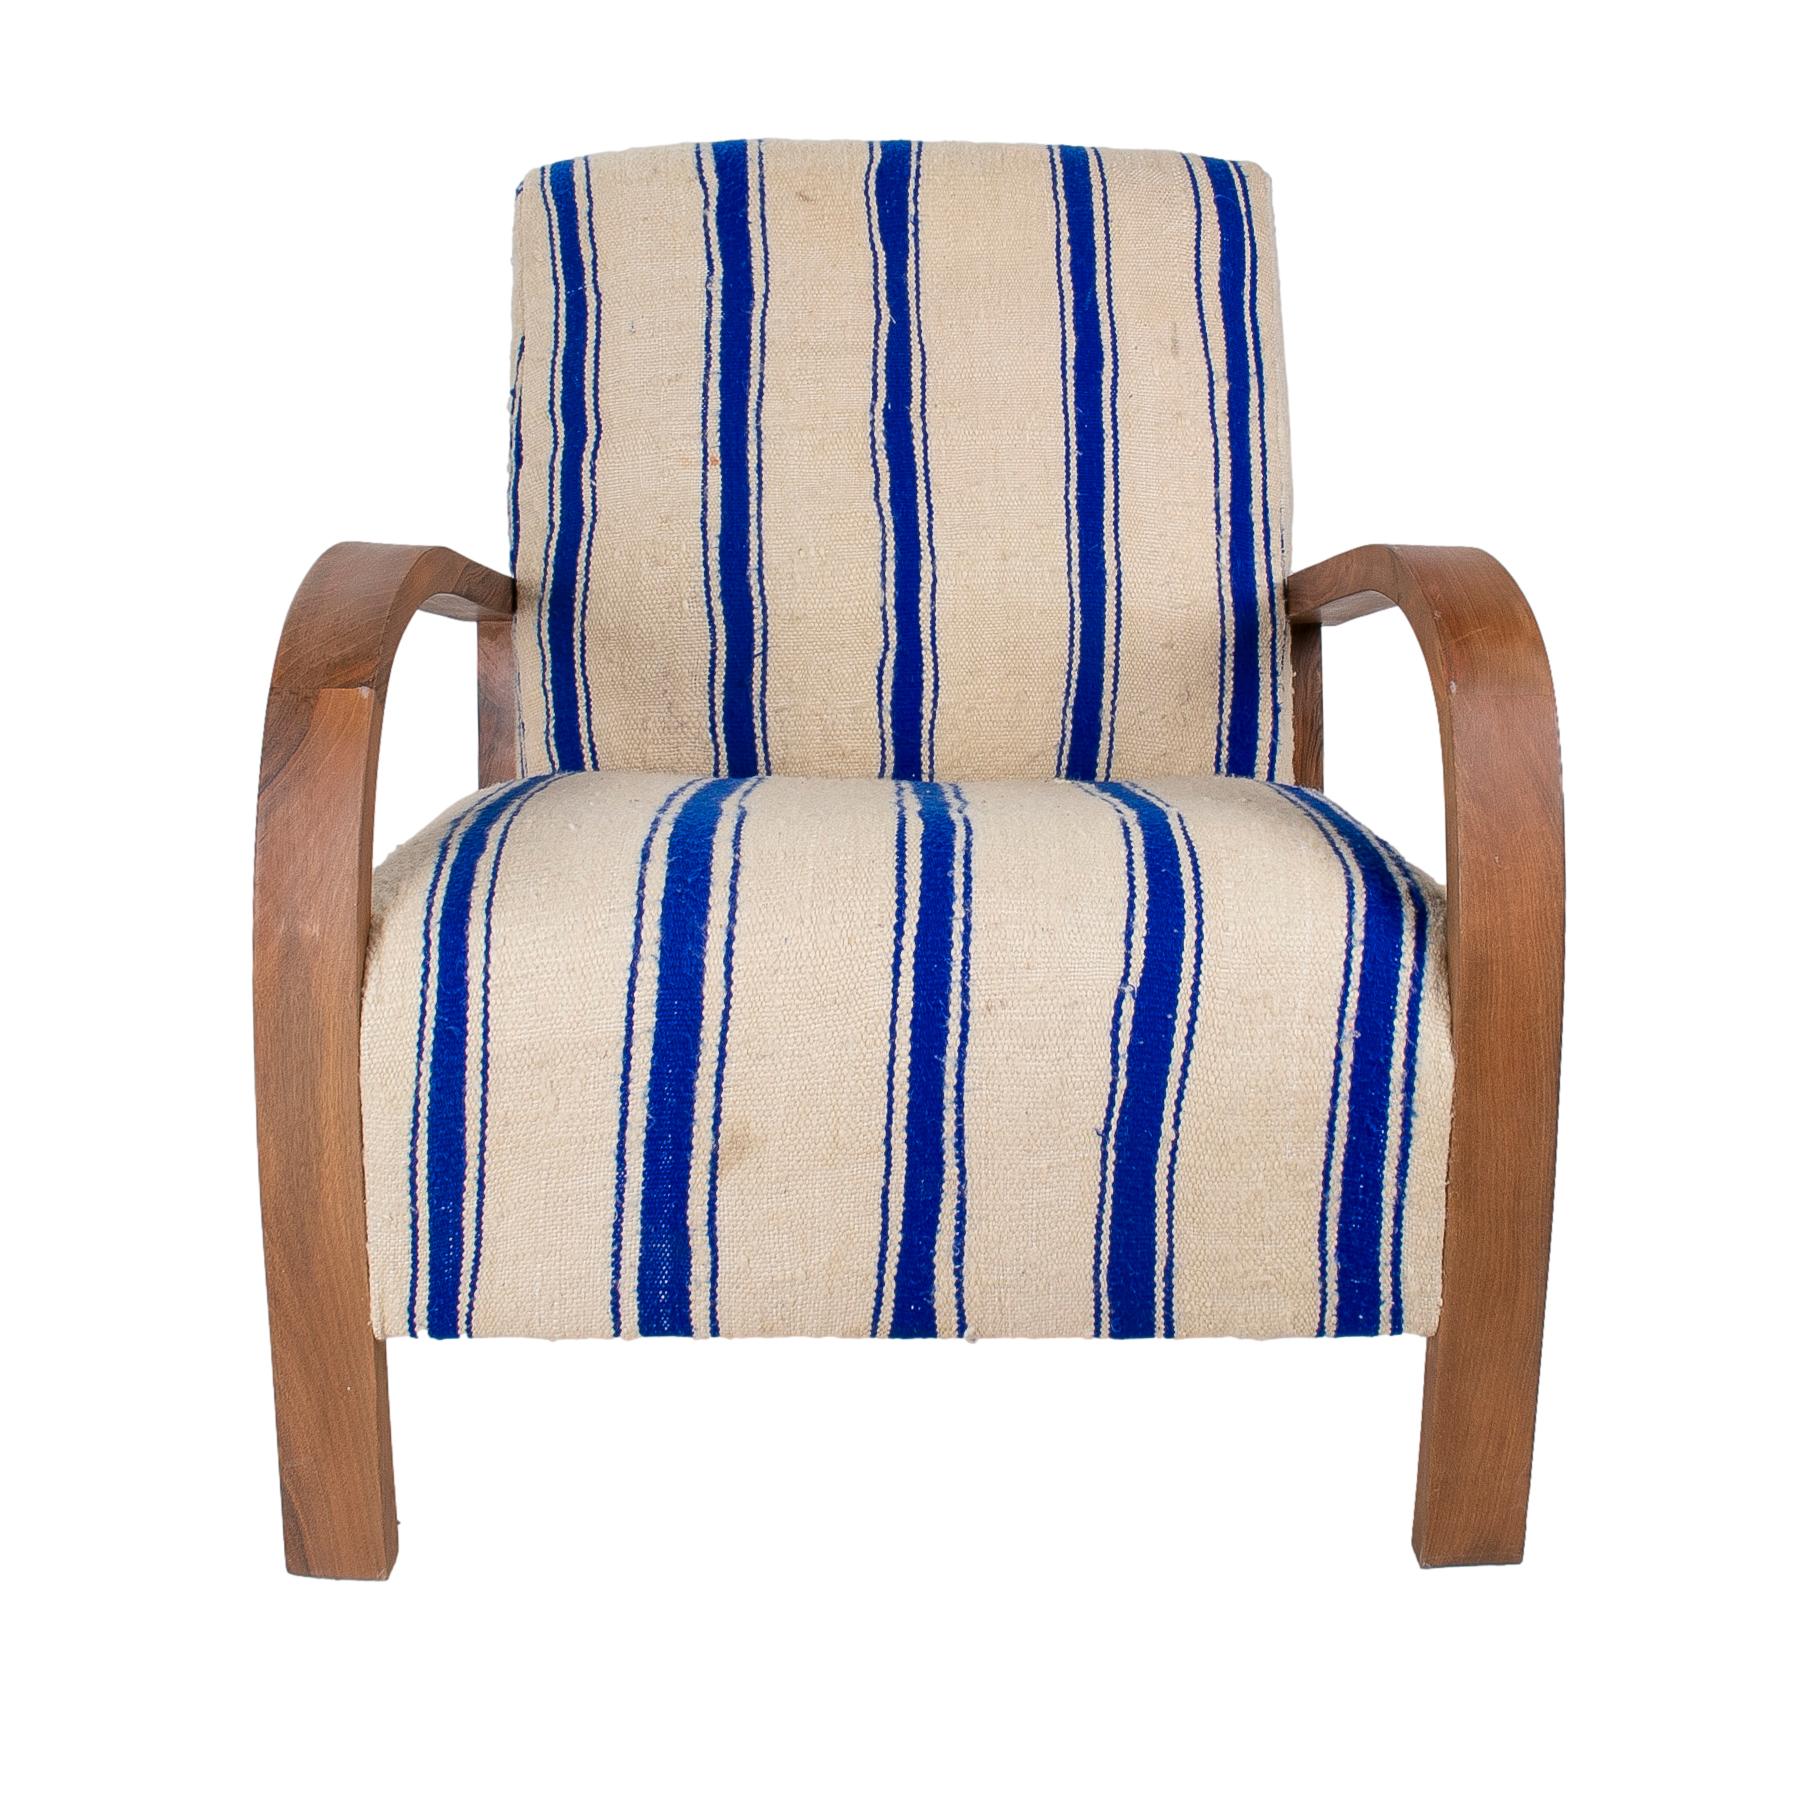 Vintage 1990s pair of Spanish white and blue upholstered armchairs.